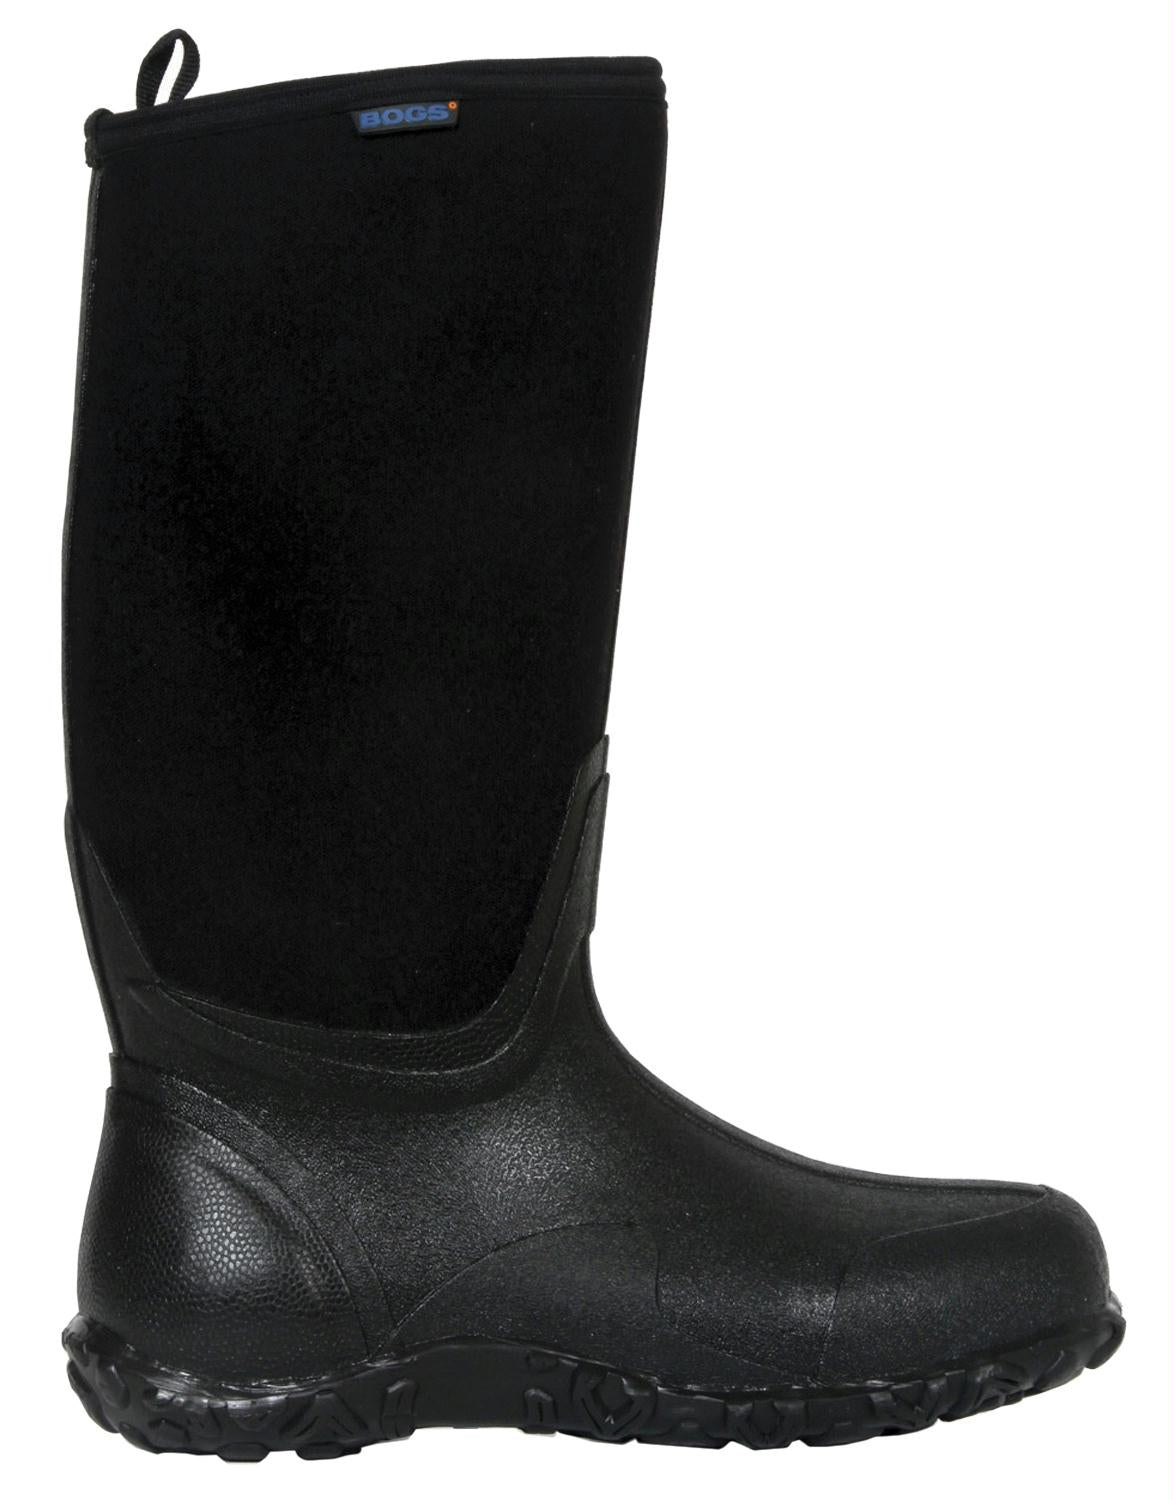 Mens Classic High Boots - aomega-products